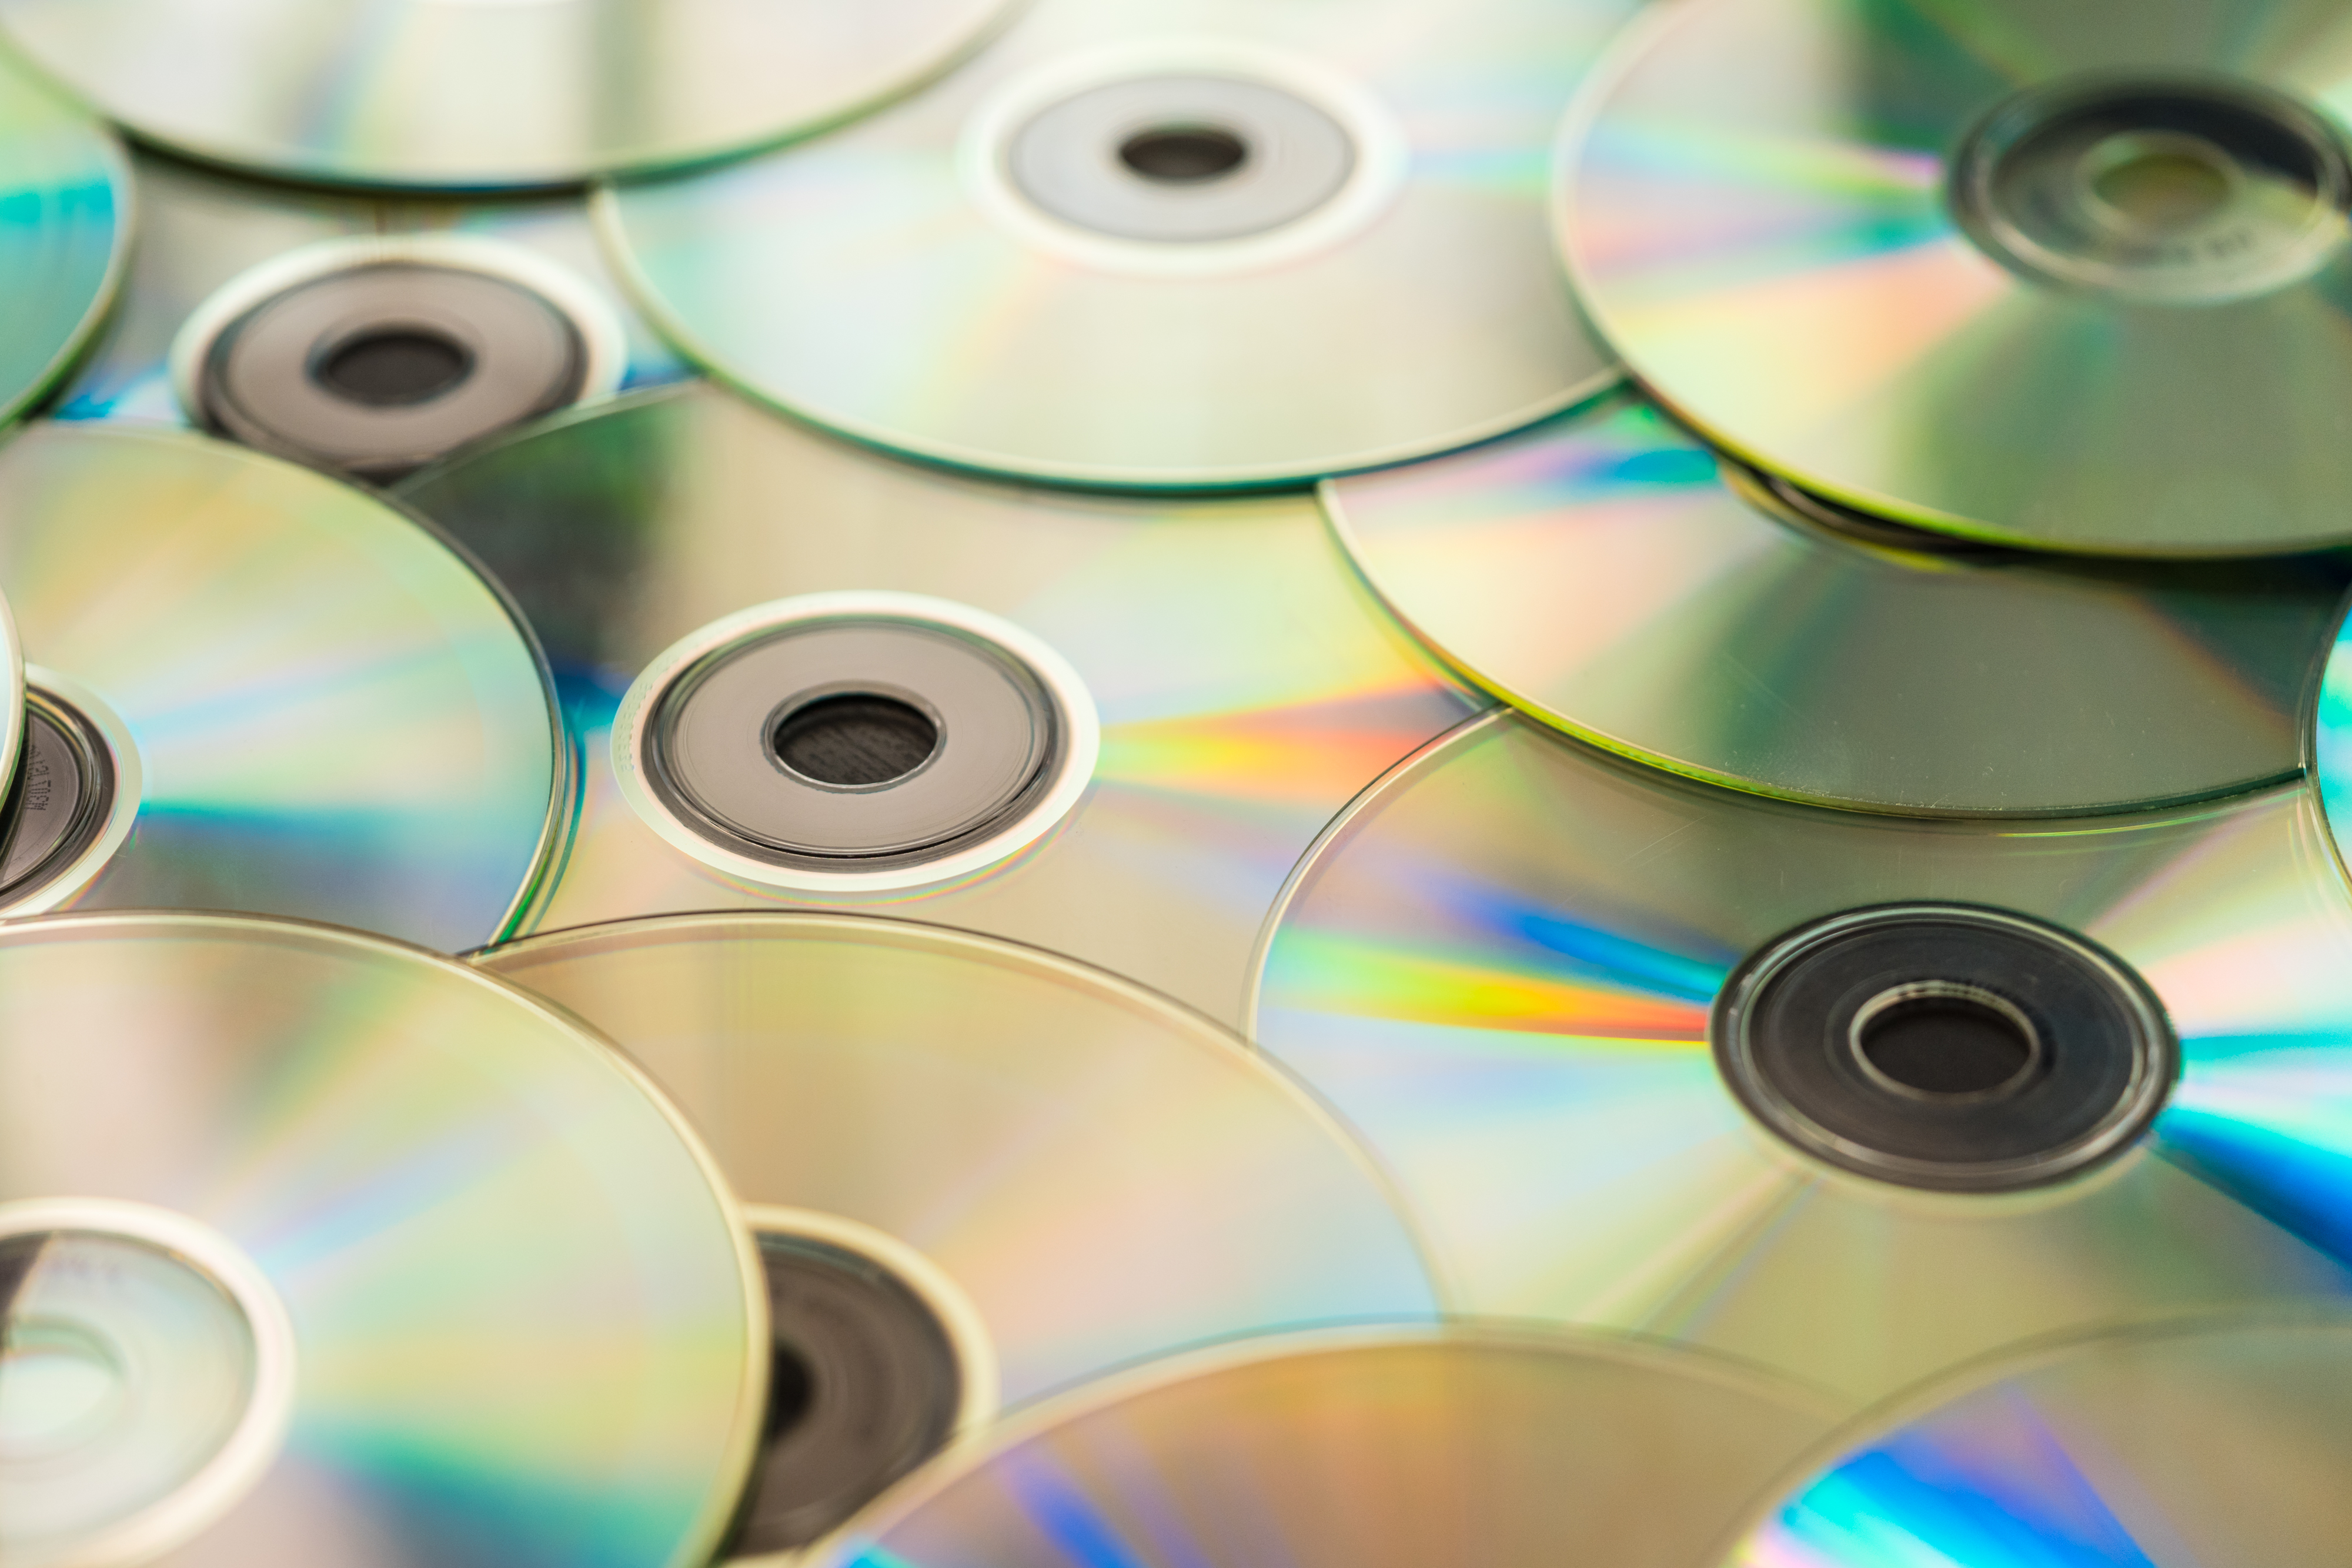 Pile of CD Compact Discs and DVDs #2 Free Stock Photo | picjumbo